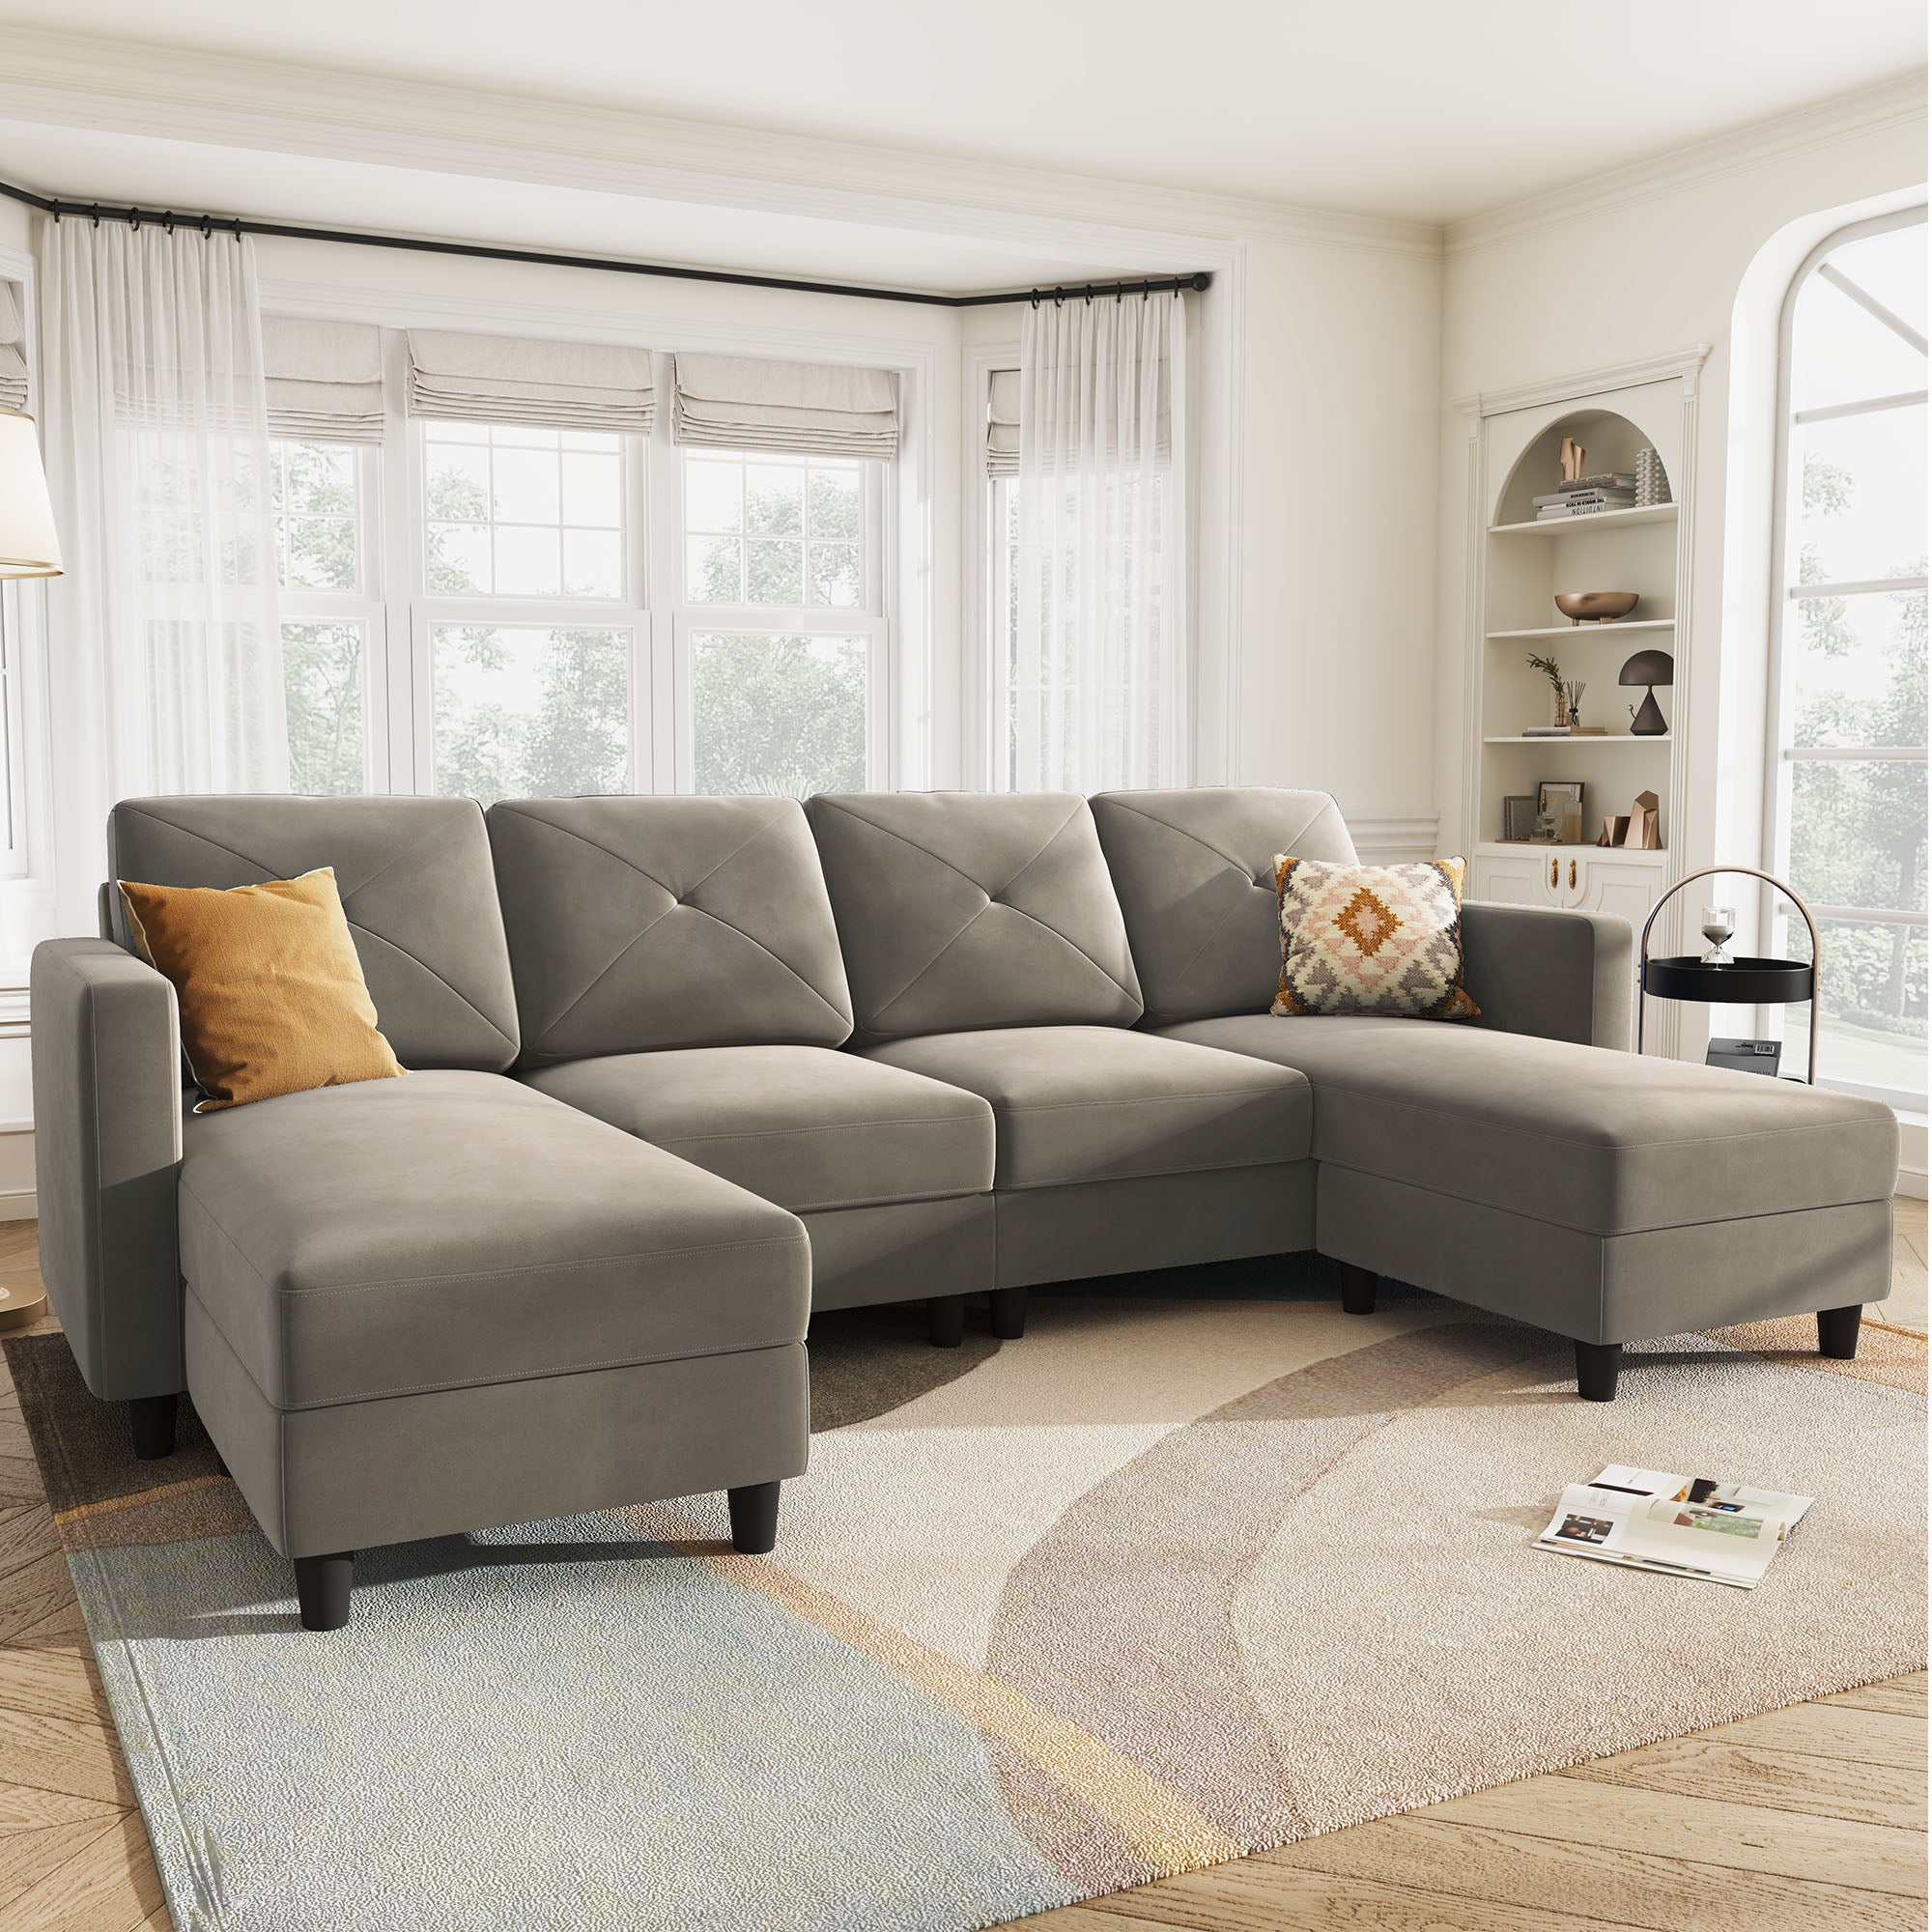 HONBAY 4-Seat U-Shaped Sofa Convertible Sectional Sofa with Reversible Chaise